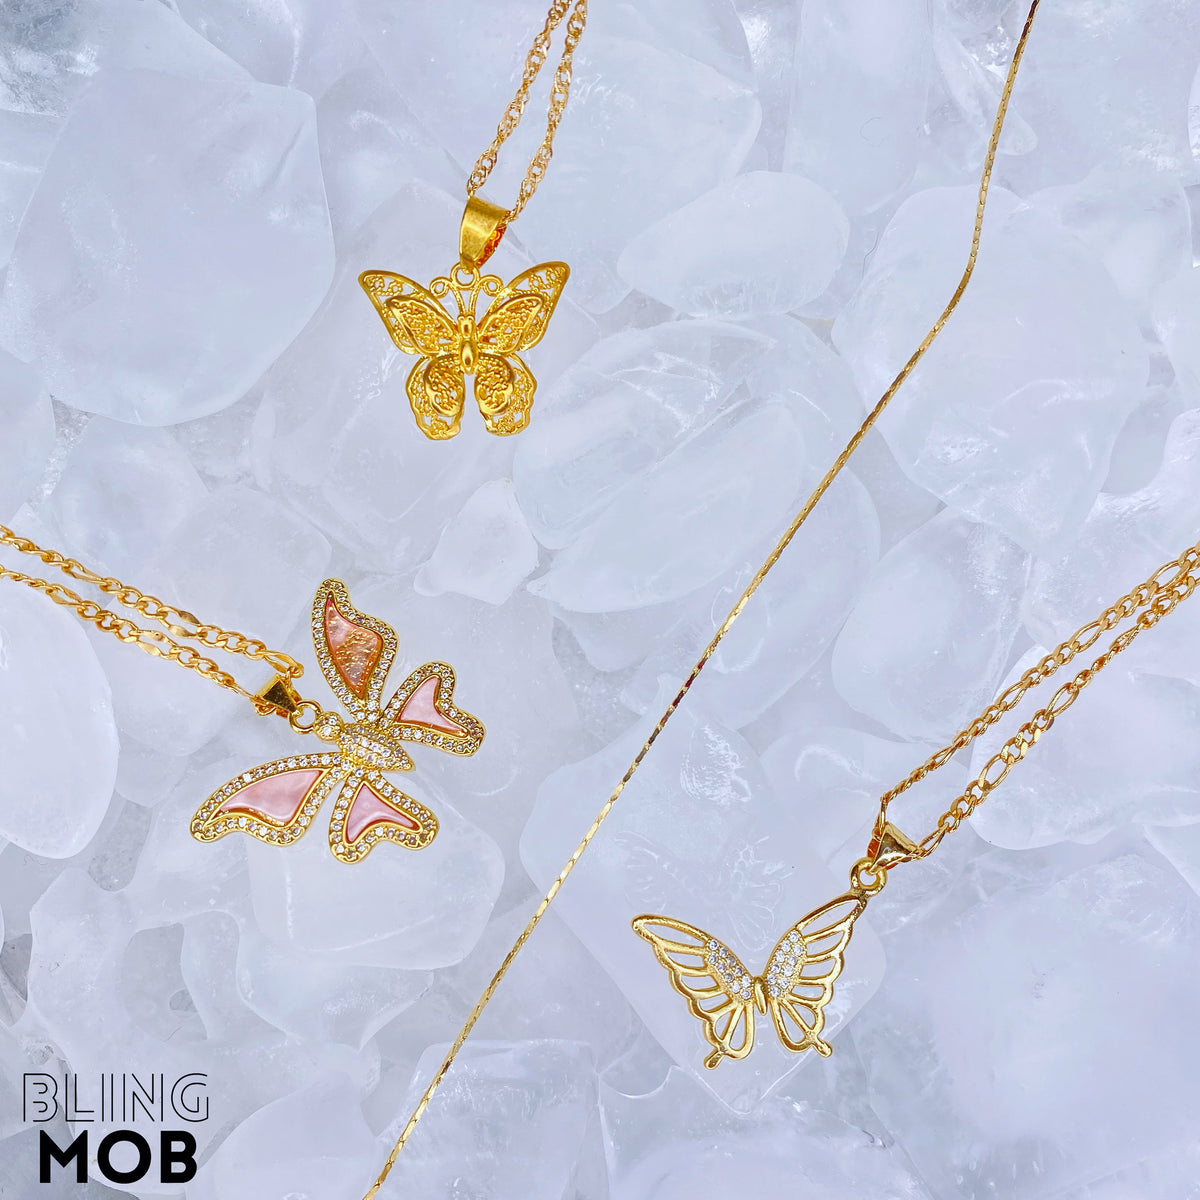 goldfilled butterfly necklaces and dainty goldfilled chain on ice